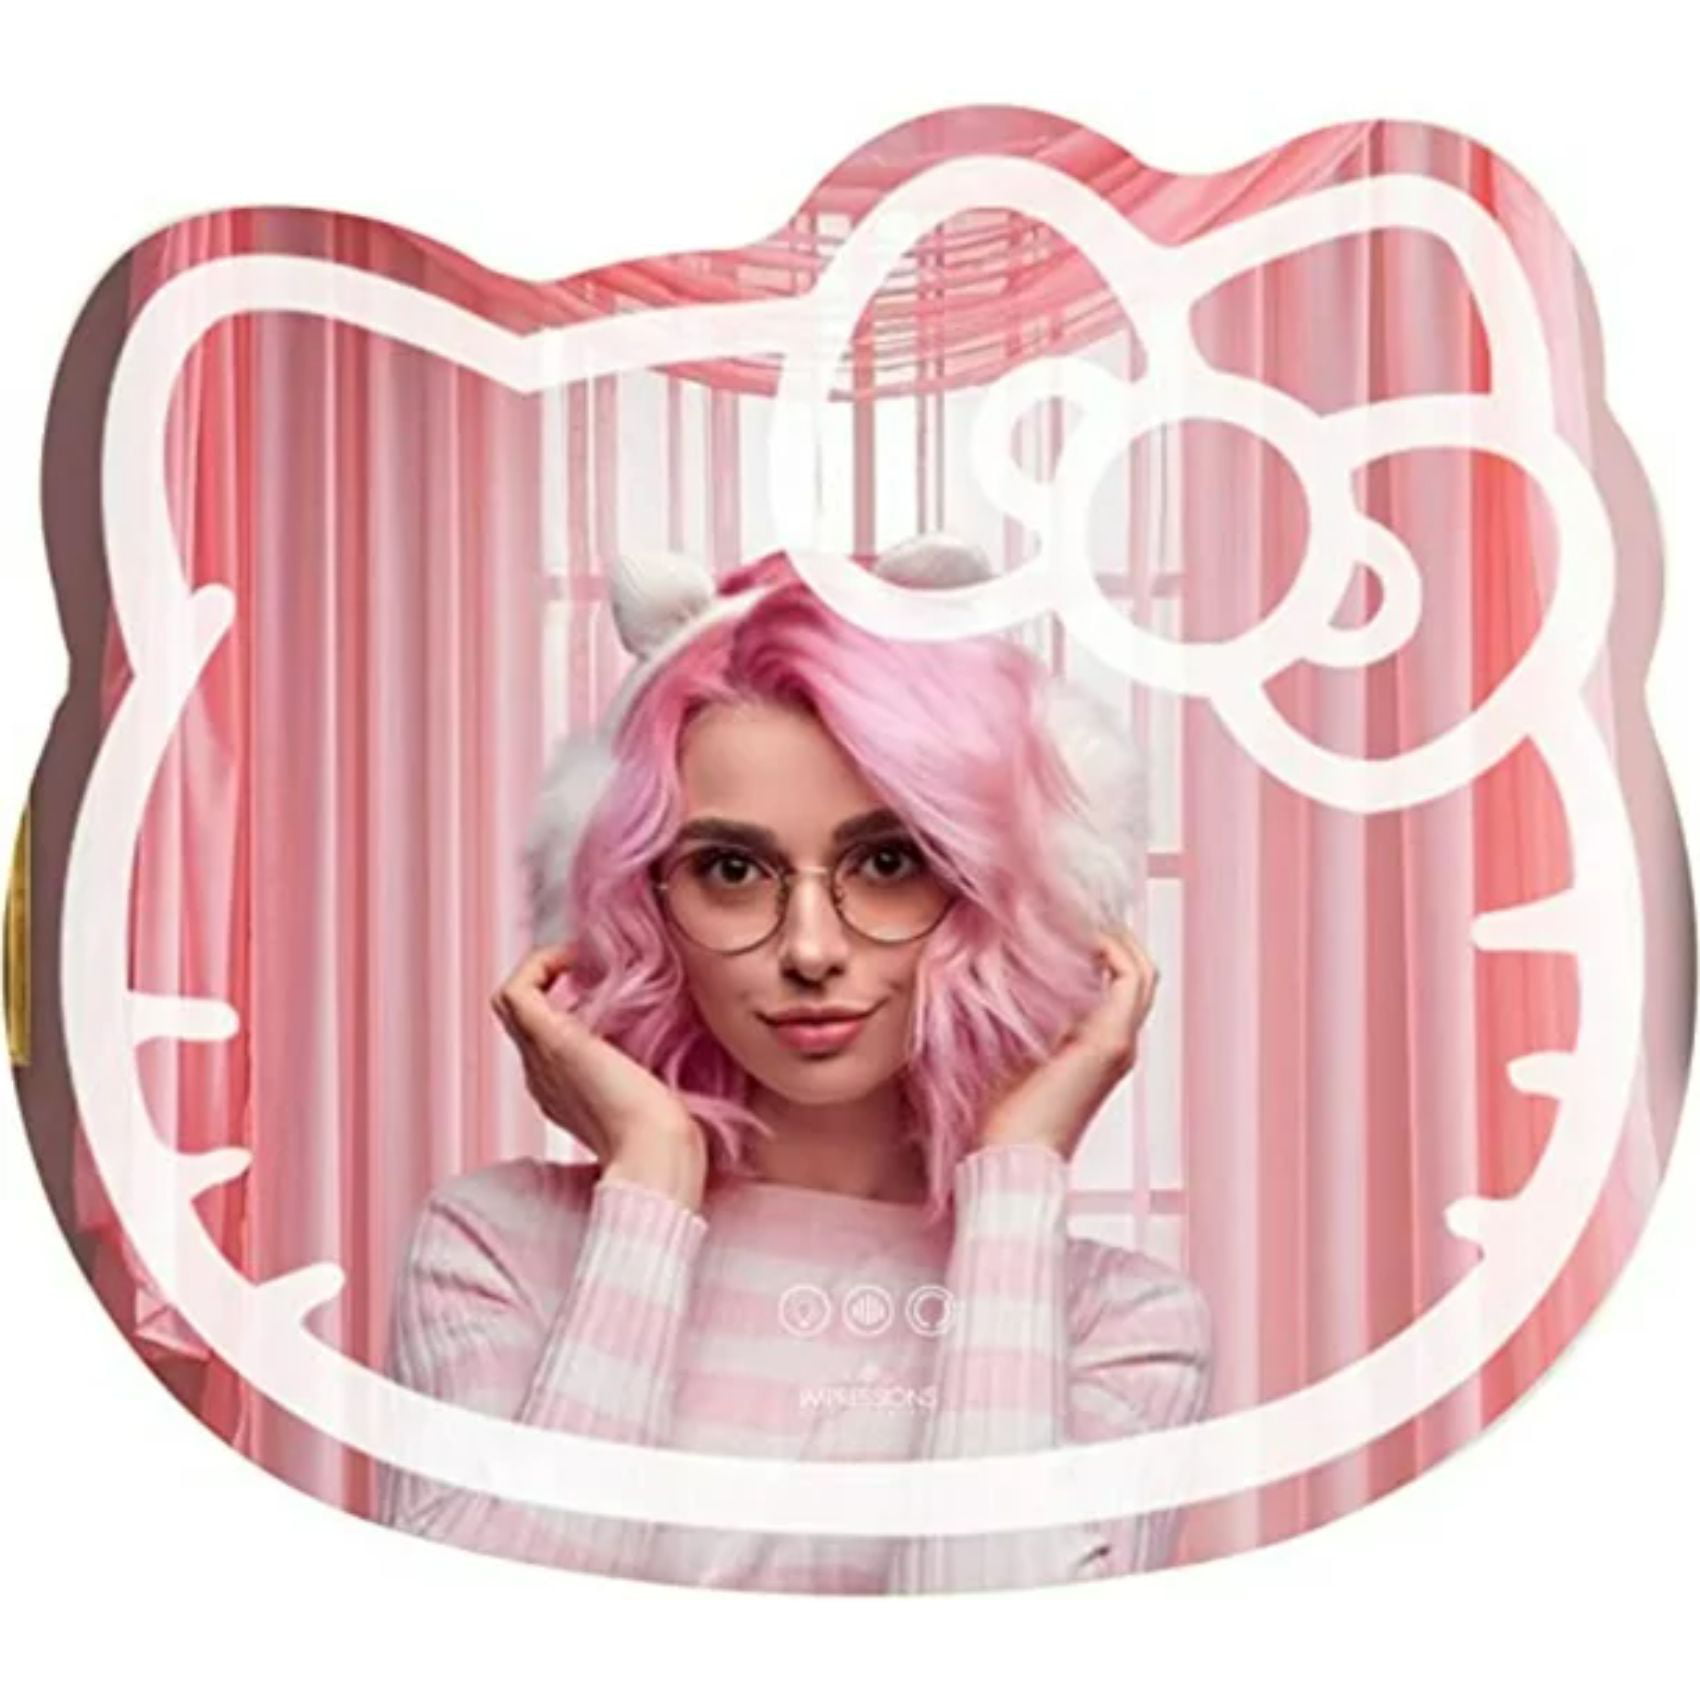 Impressions Vanity Hello Kitty Wall Smart Makeup Mirror with Wi-Fi, App Controller and Dimming LED Light (White) - Walmart.com